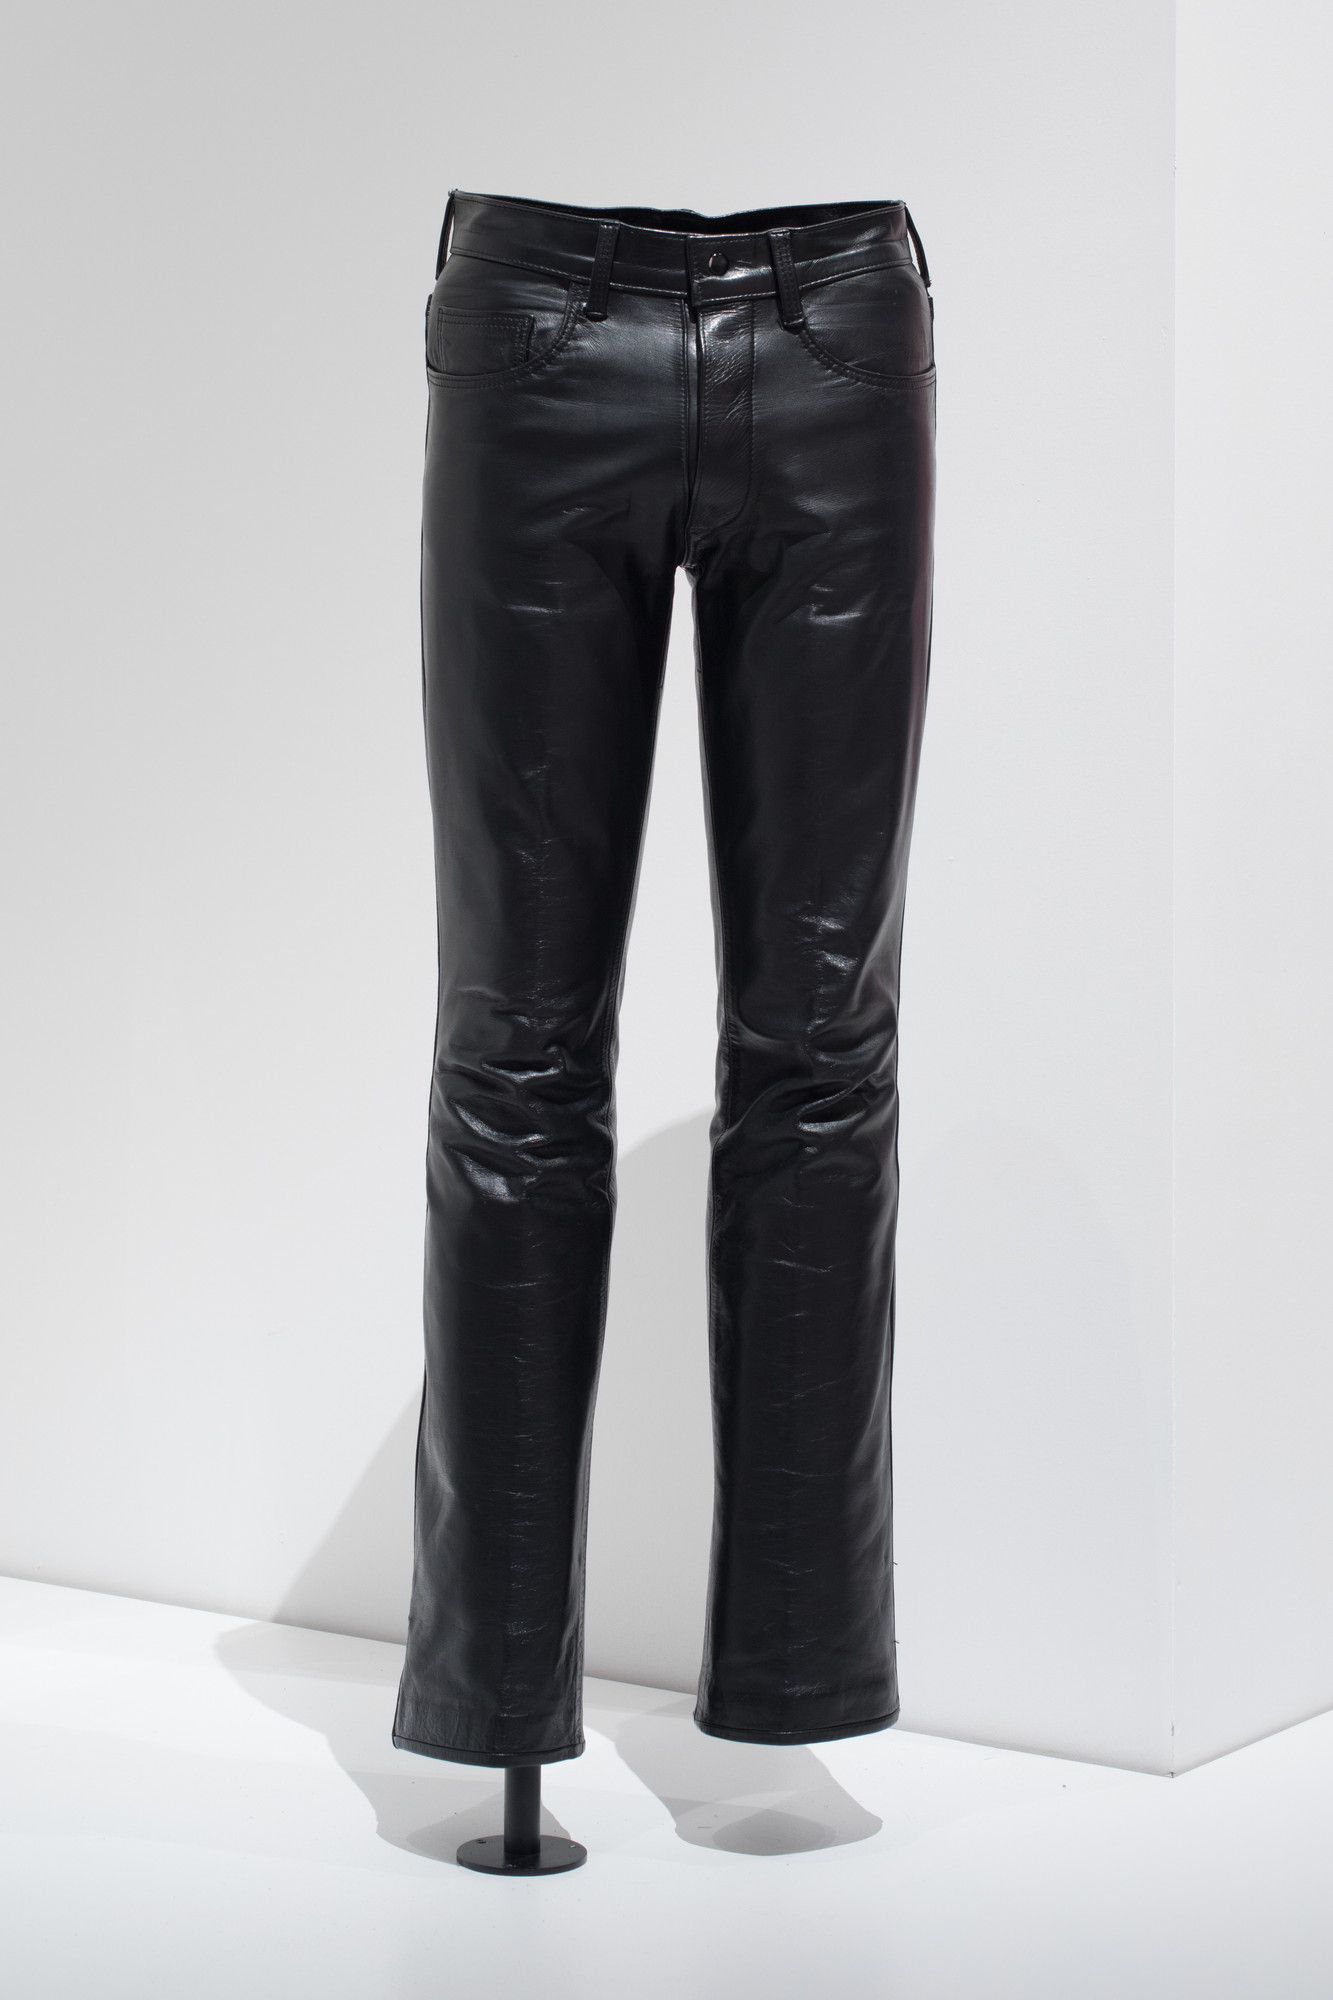 Larry Hunt (American, deceased c. 1979). Leather Pants, c. 1970s. Leather. Courtesy Leather Archives & Museum, Chicago. Image taken during installation of _Items: Is Fashion Modern?_ 